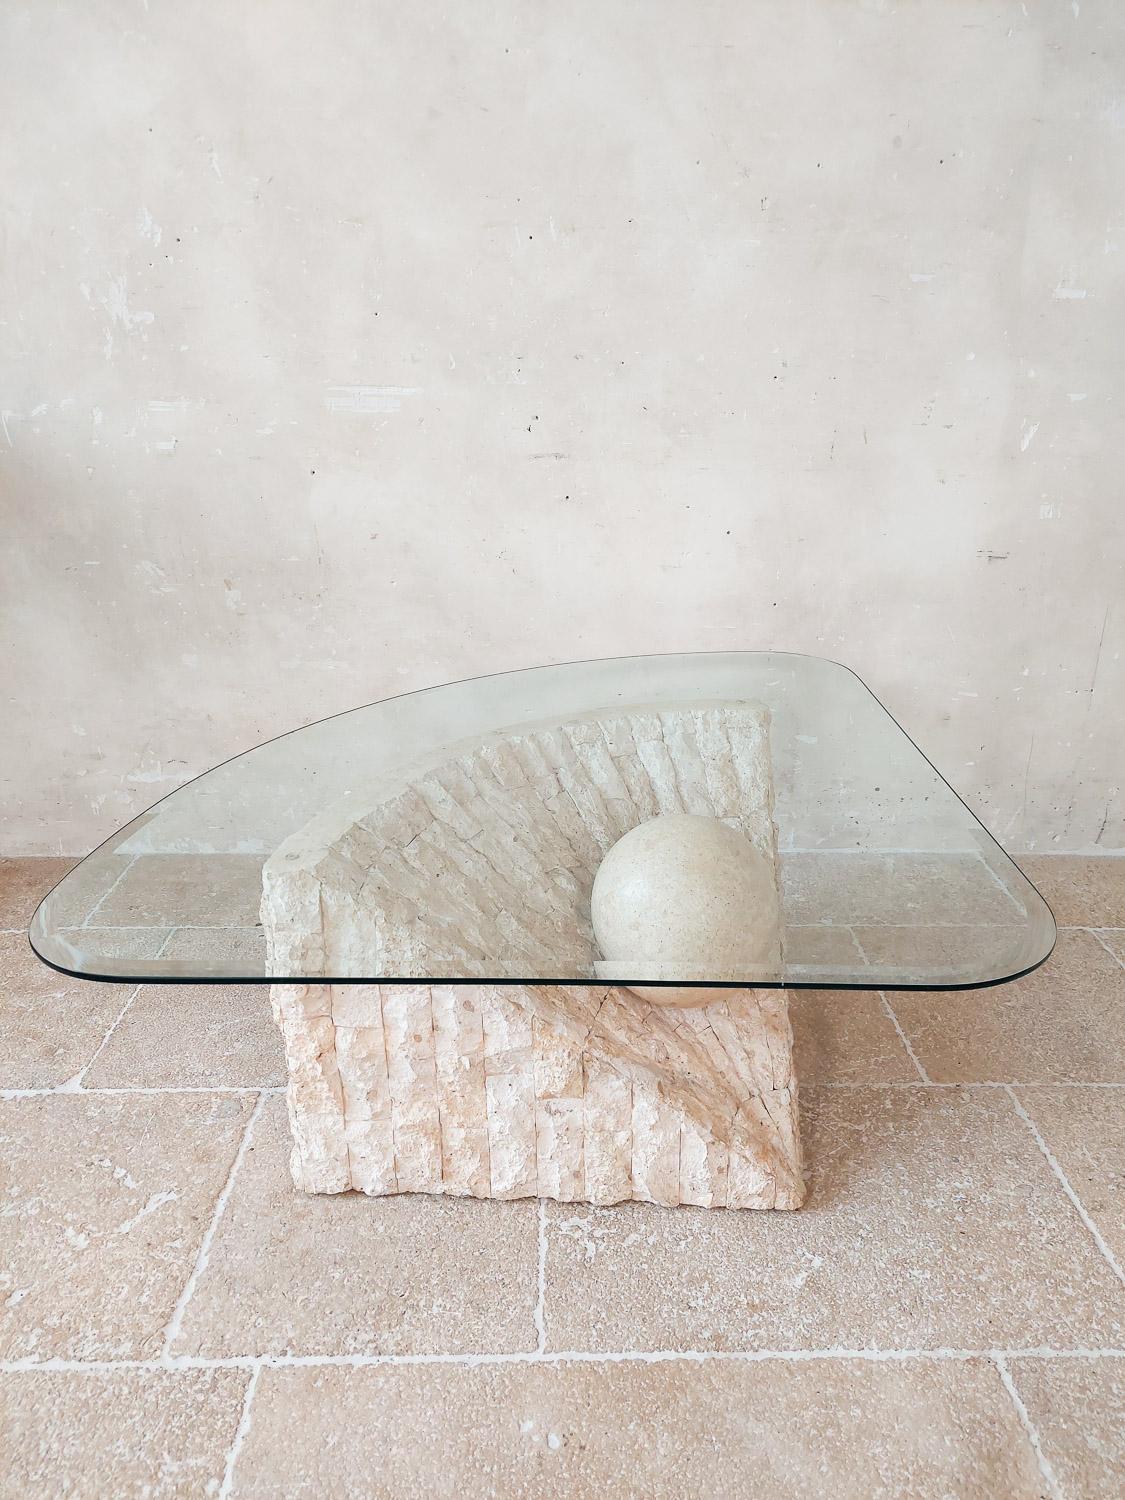 Mactan stone coffee table by Magnussen Ponte, 1980s. Unique postmodern design with a textured and geometric base with a suspended sphere which holds the triangular glass top. 

Mactan is a natural stone, although this piece looks heavy and